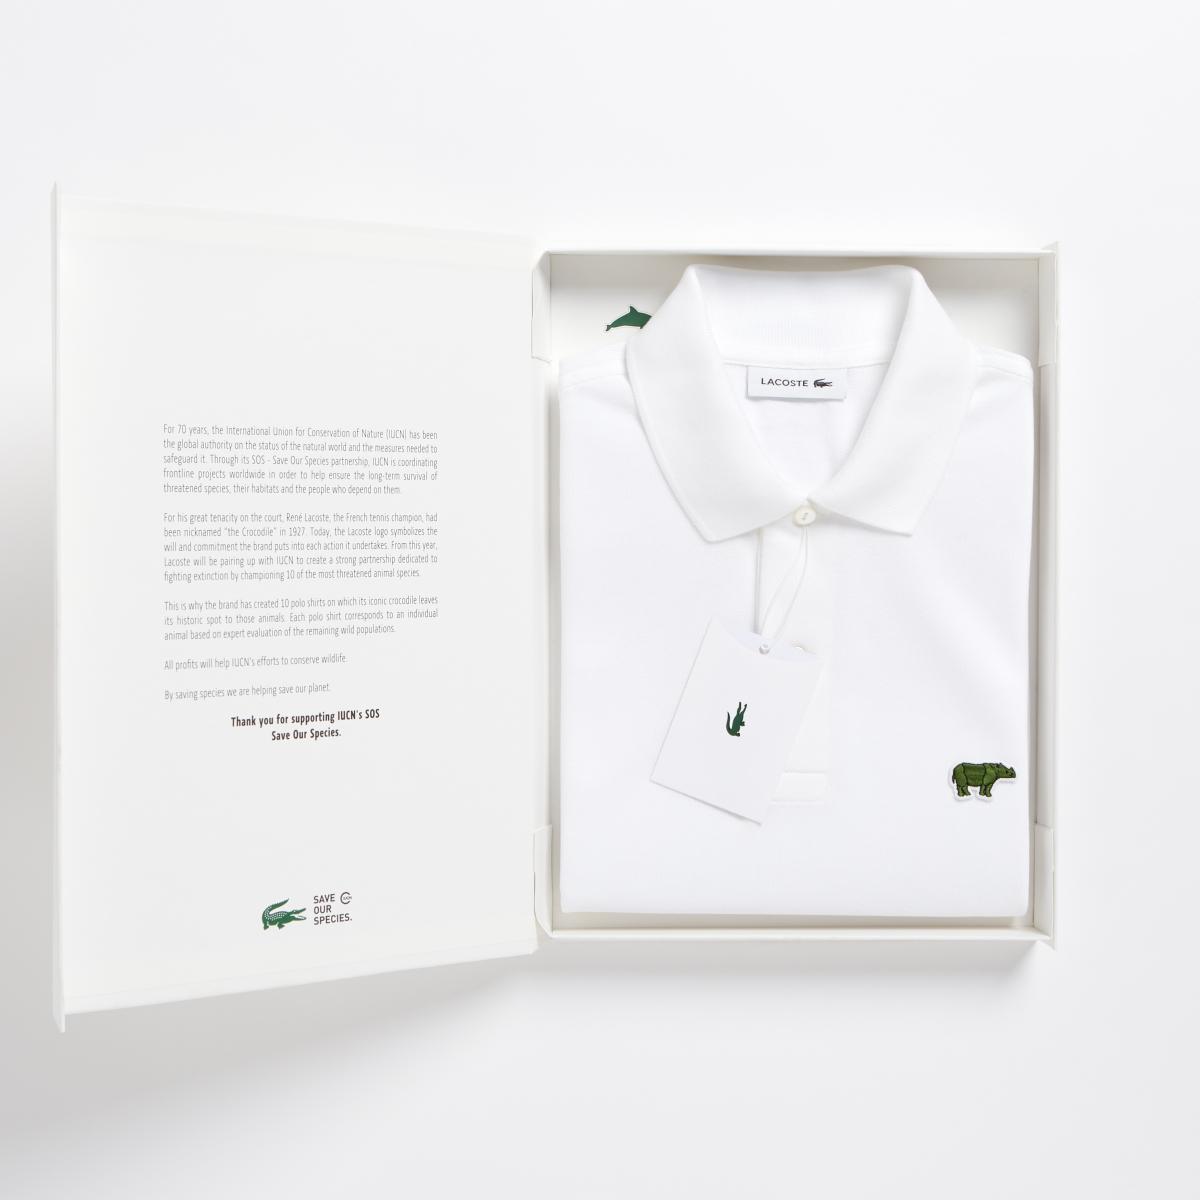 Lacoste and IUCN forces to champion the cause of threatened IUCN